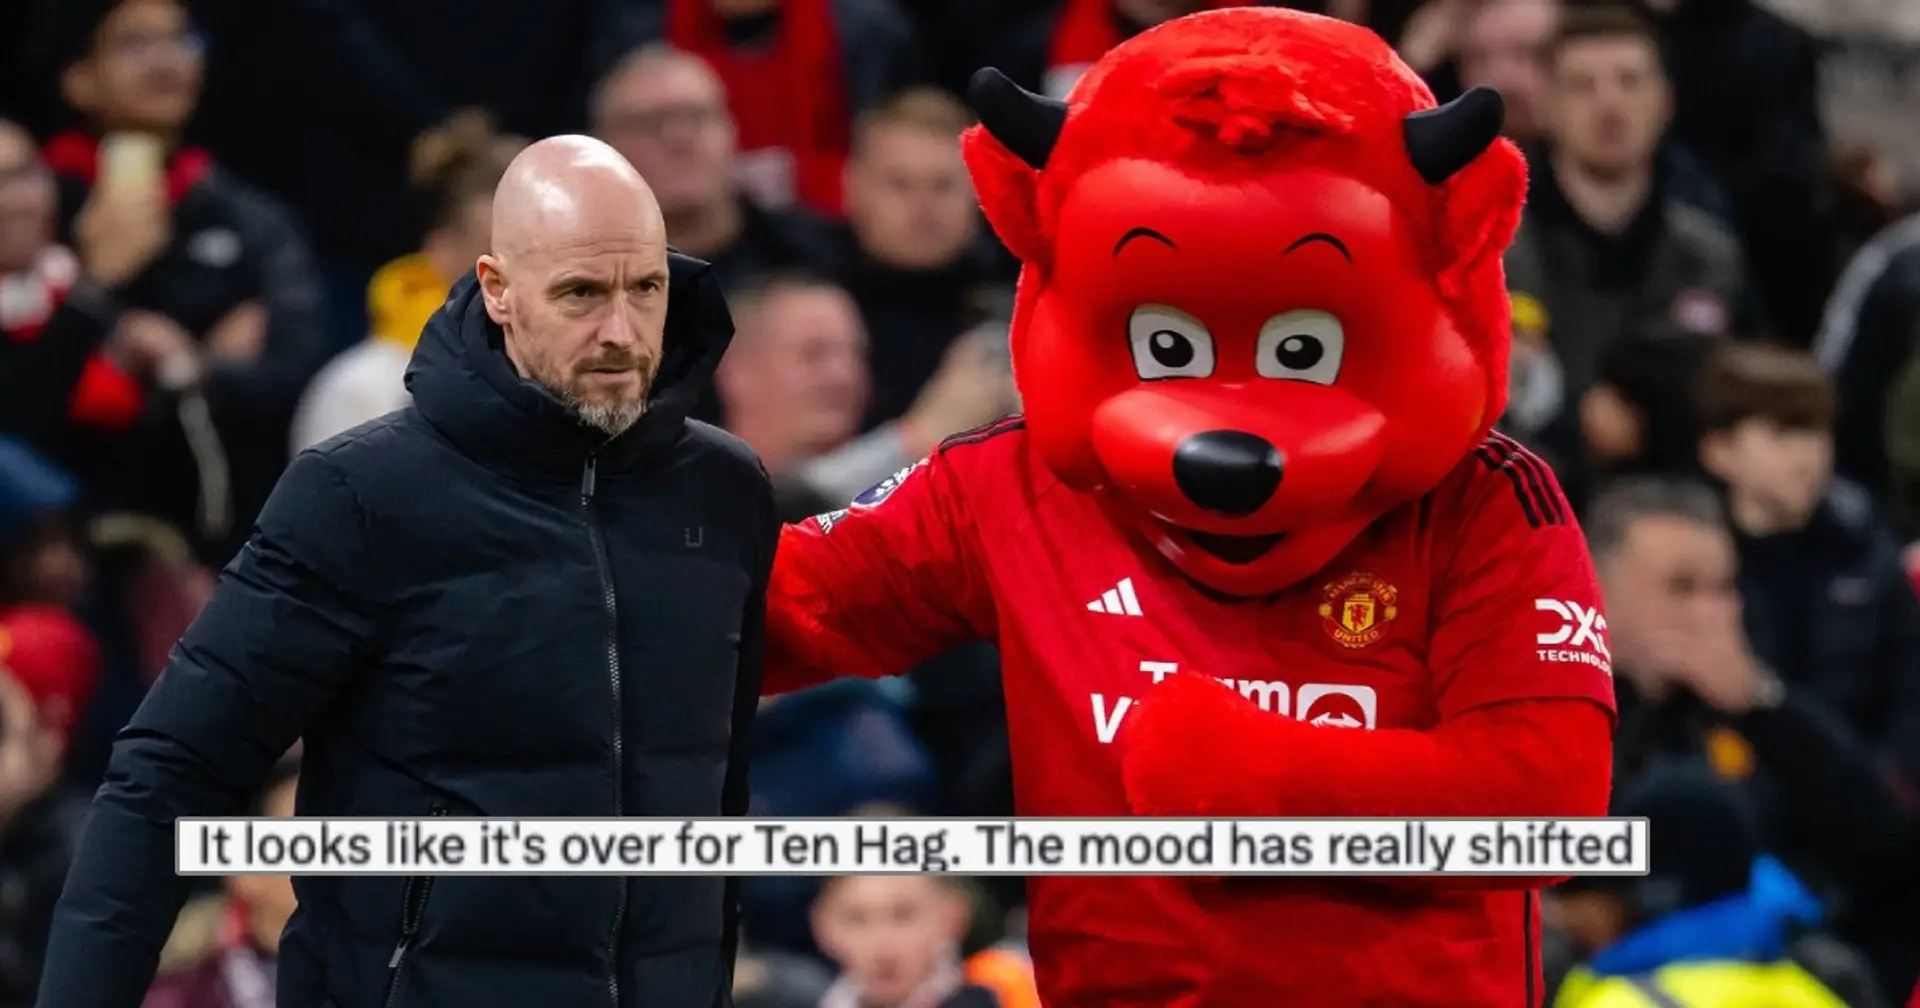 Man United fan gives 4 reasons there's no way back for Ten Hag at the club